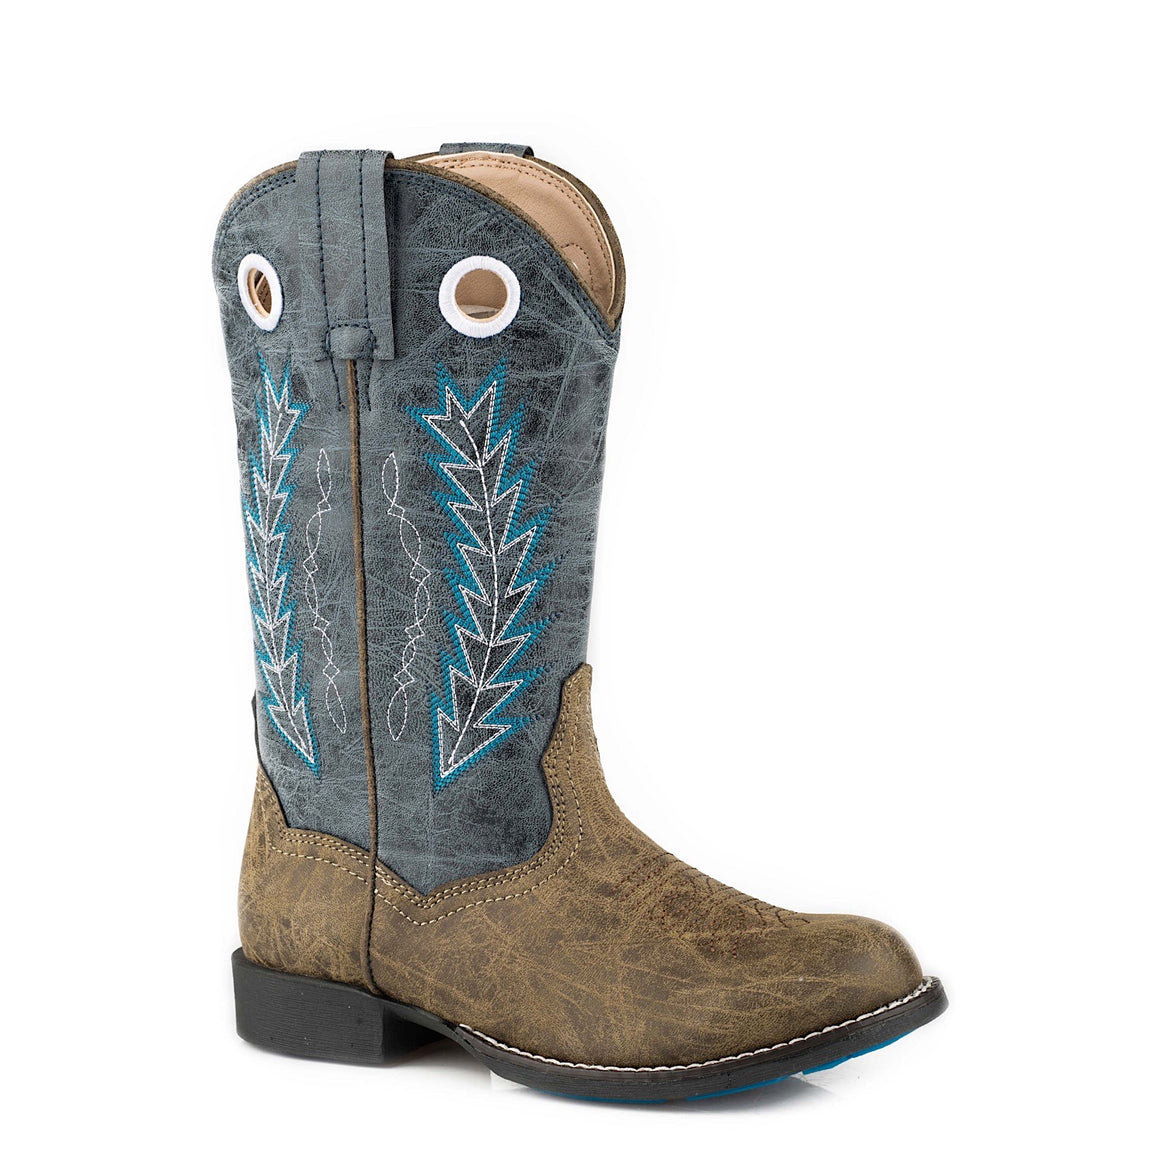 Roper LITTLE KIDS Hole in the Wall Boot Brown/Blue